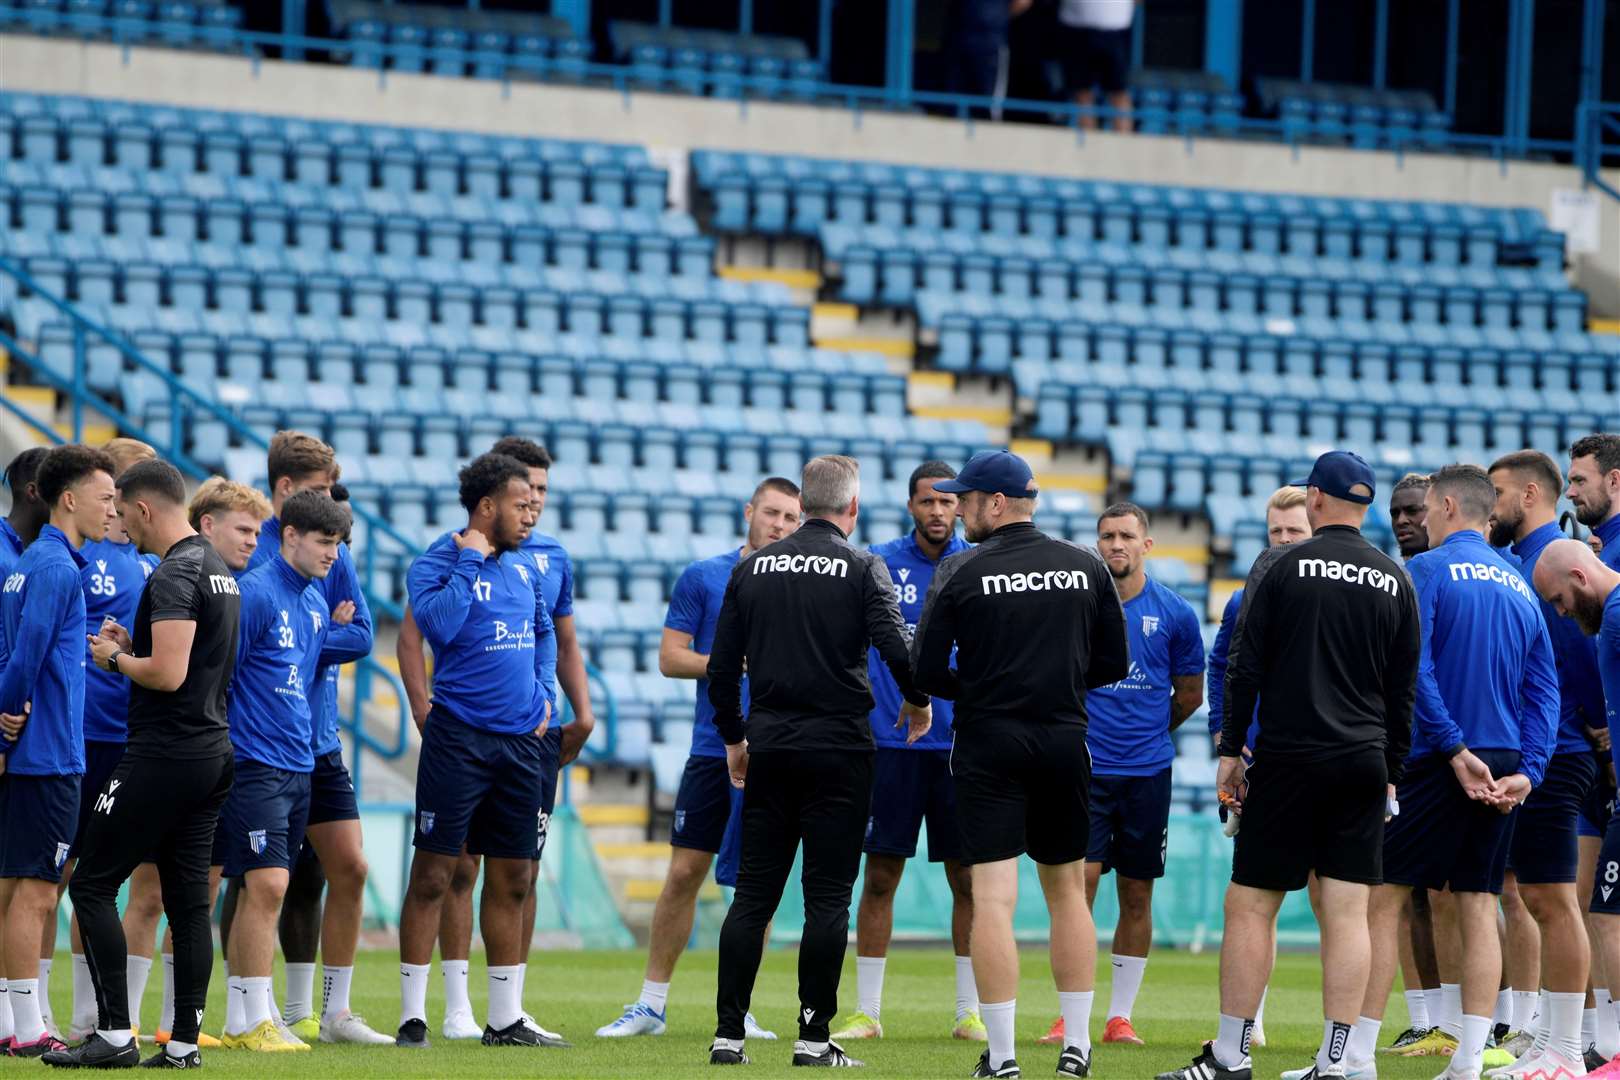 Manager Neil Harris talks with the players ahead of the open session at Priestfield Picture: Barry Goodwin